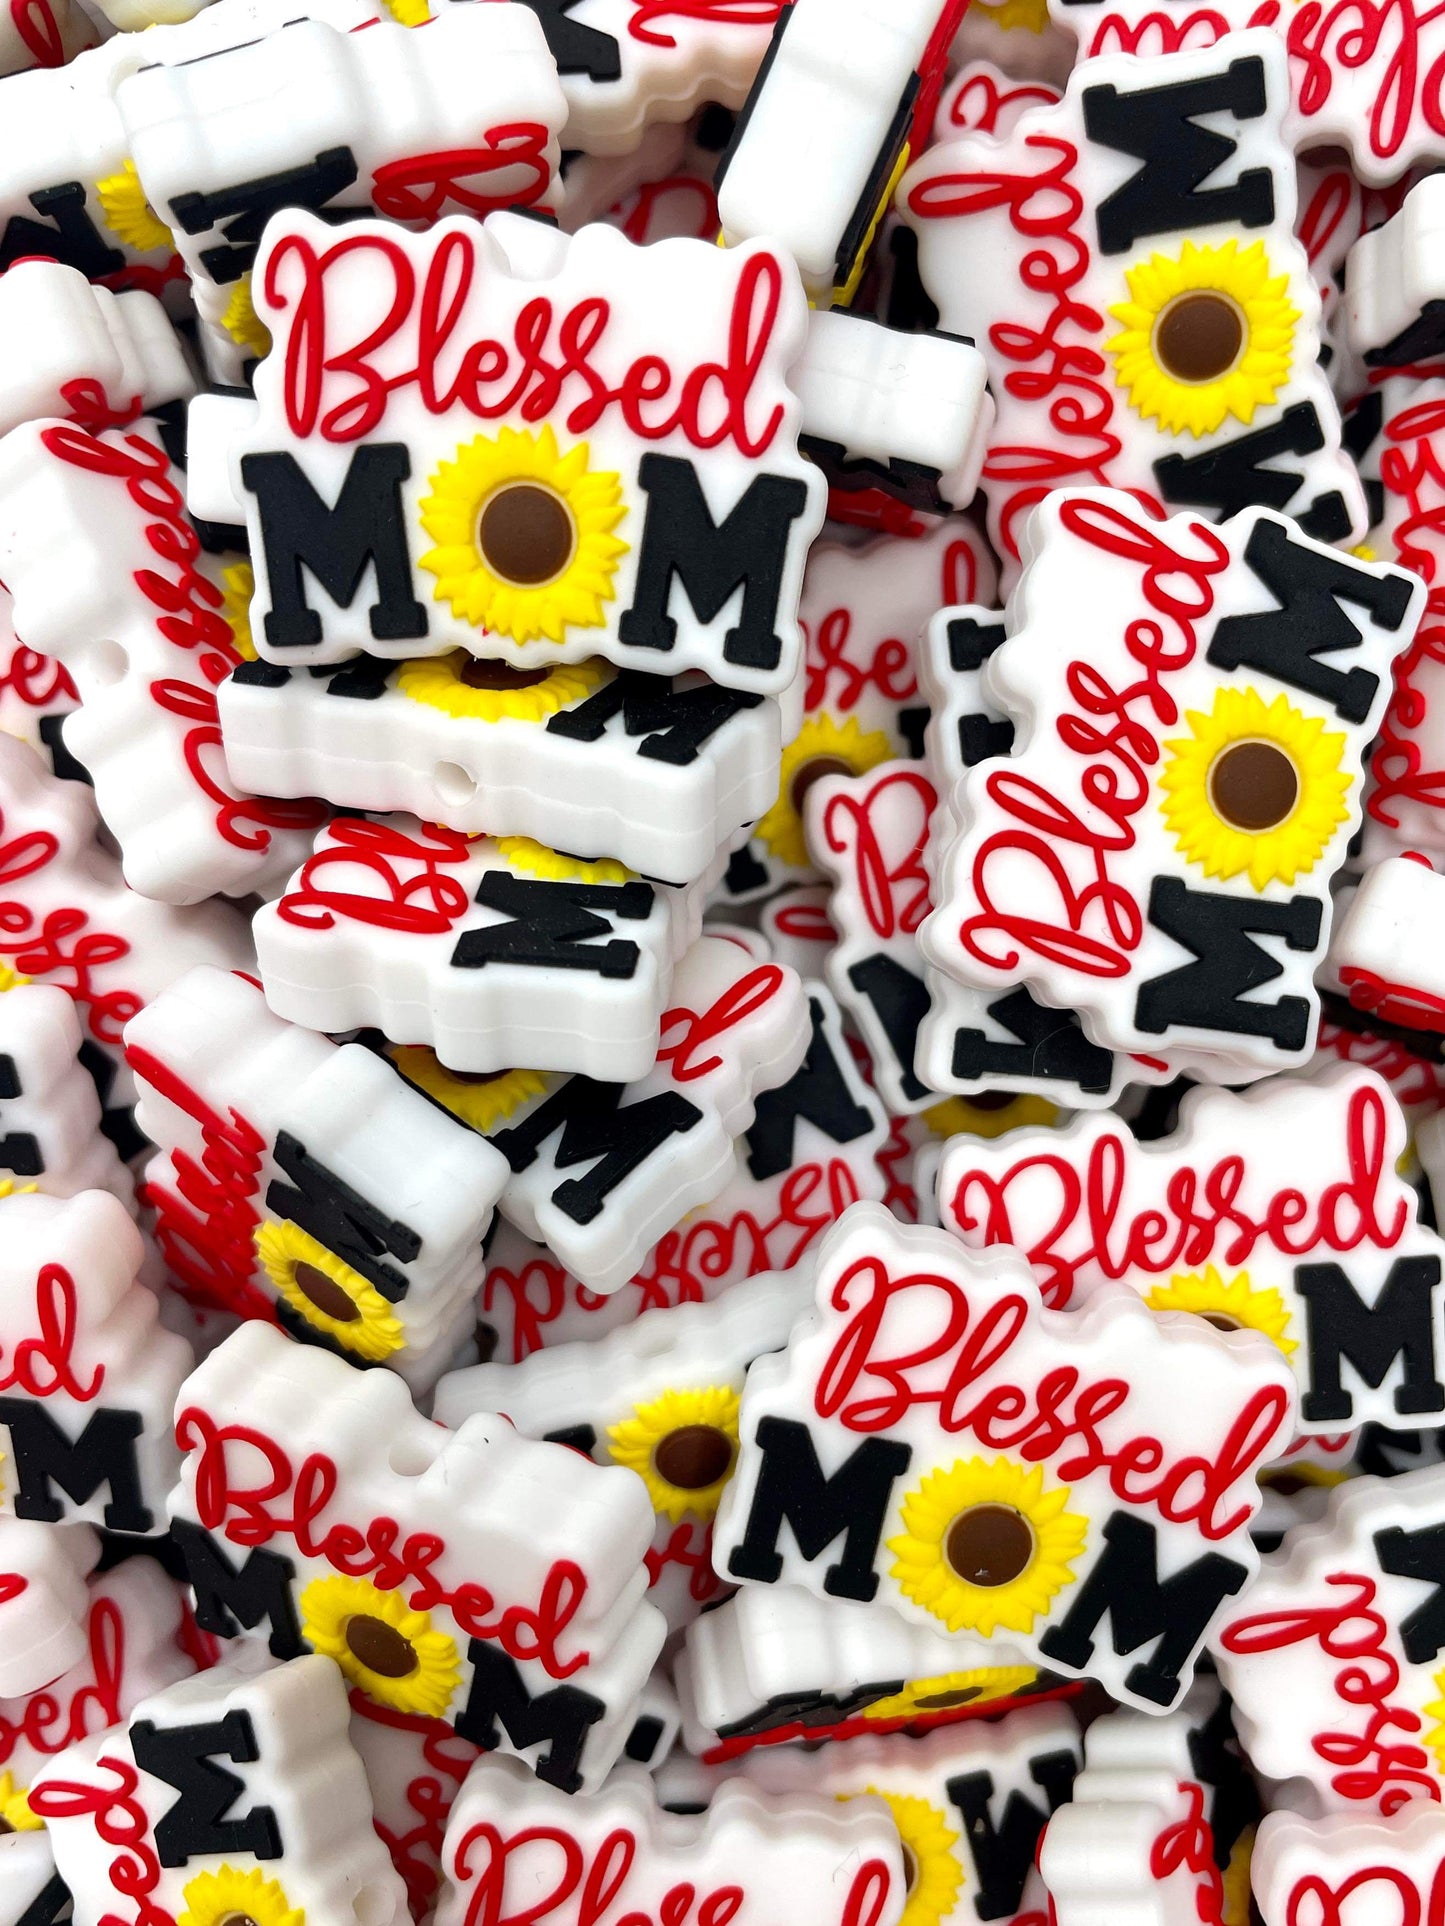 Blessed Mom Focal Bead